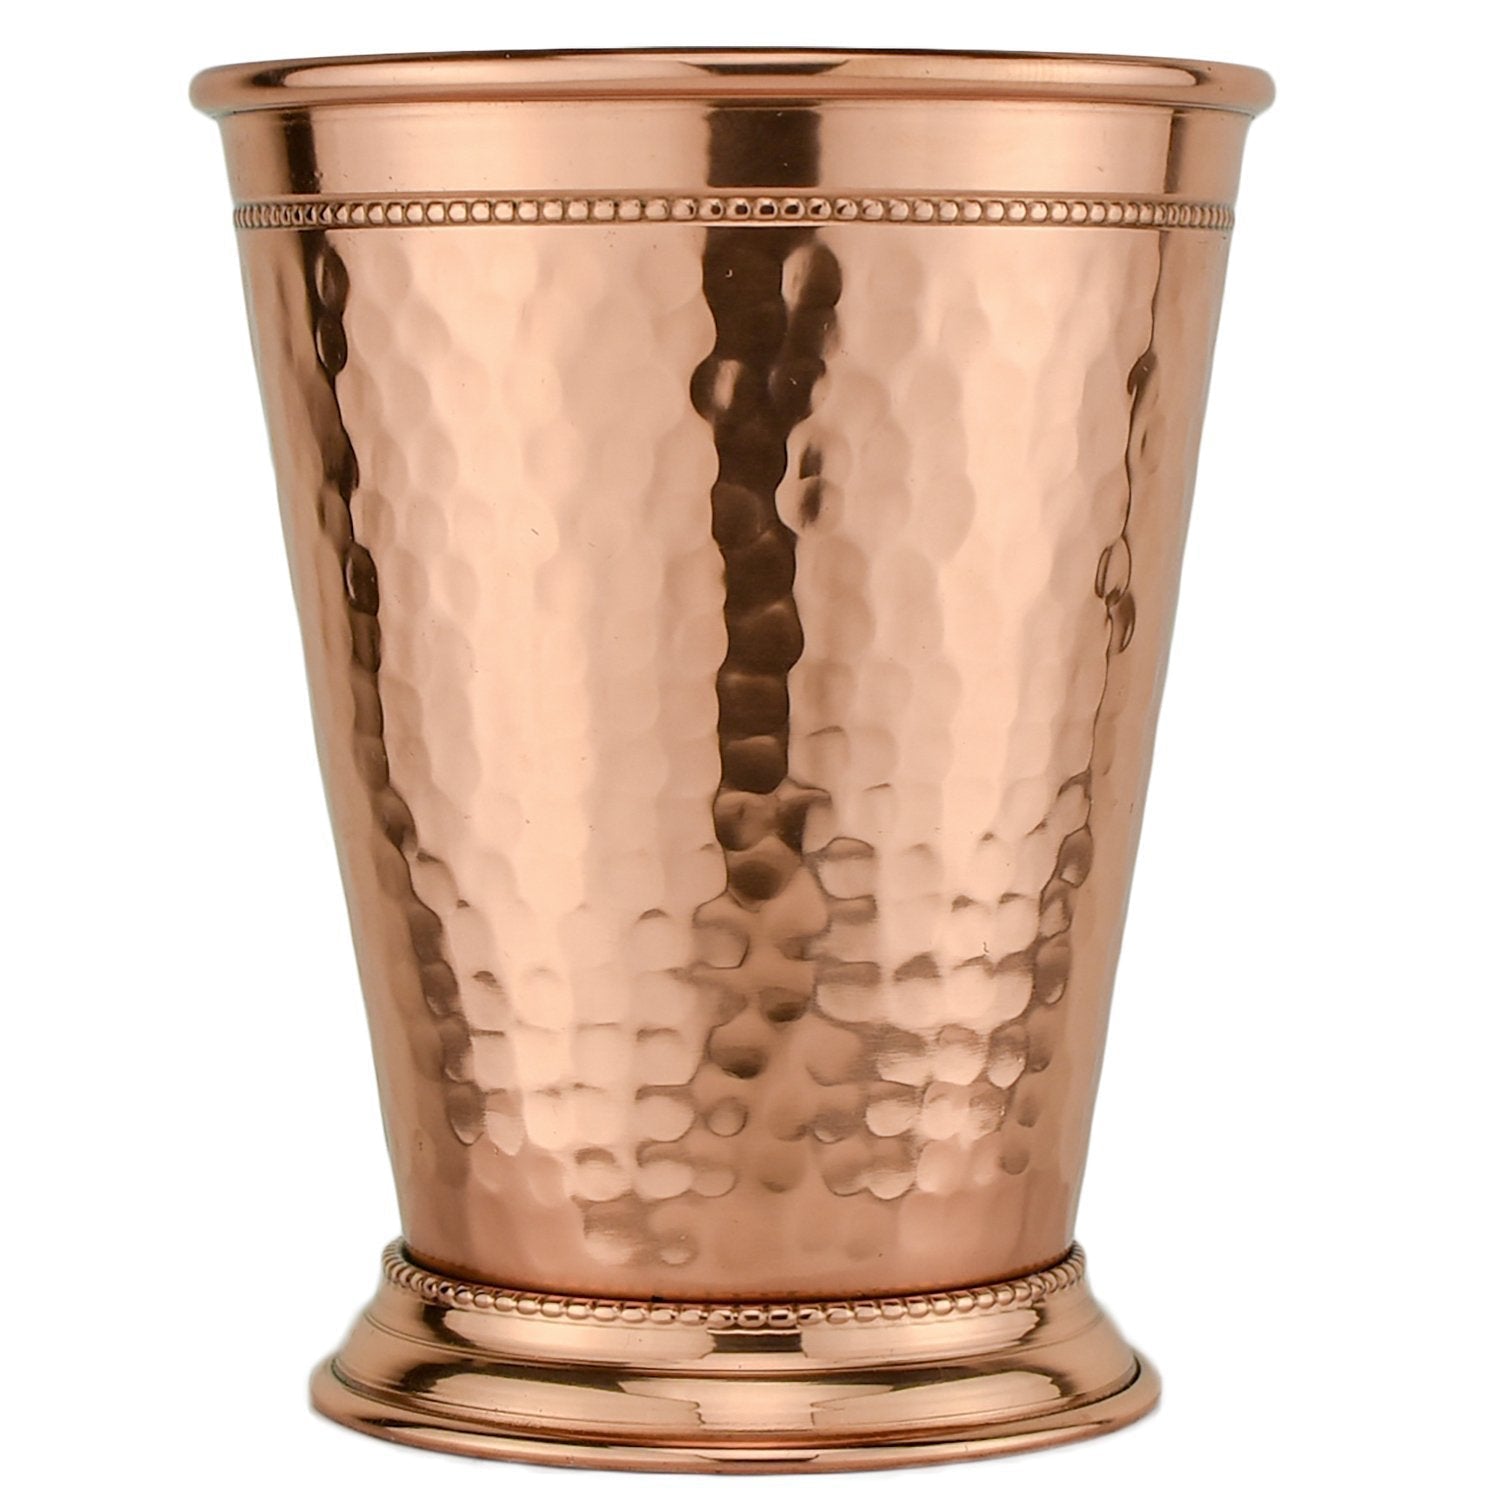 Prince of Scots 100% Pure Hammered Copper Mint Julep Cup-Mint Julep-Prince of Scots-810032751562-MintJulepCH-Prince of Scots